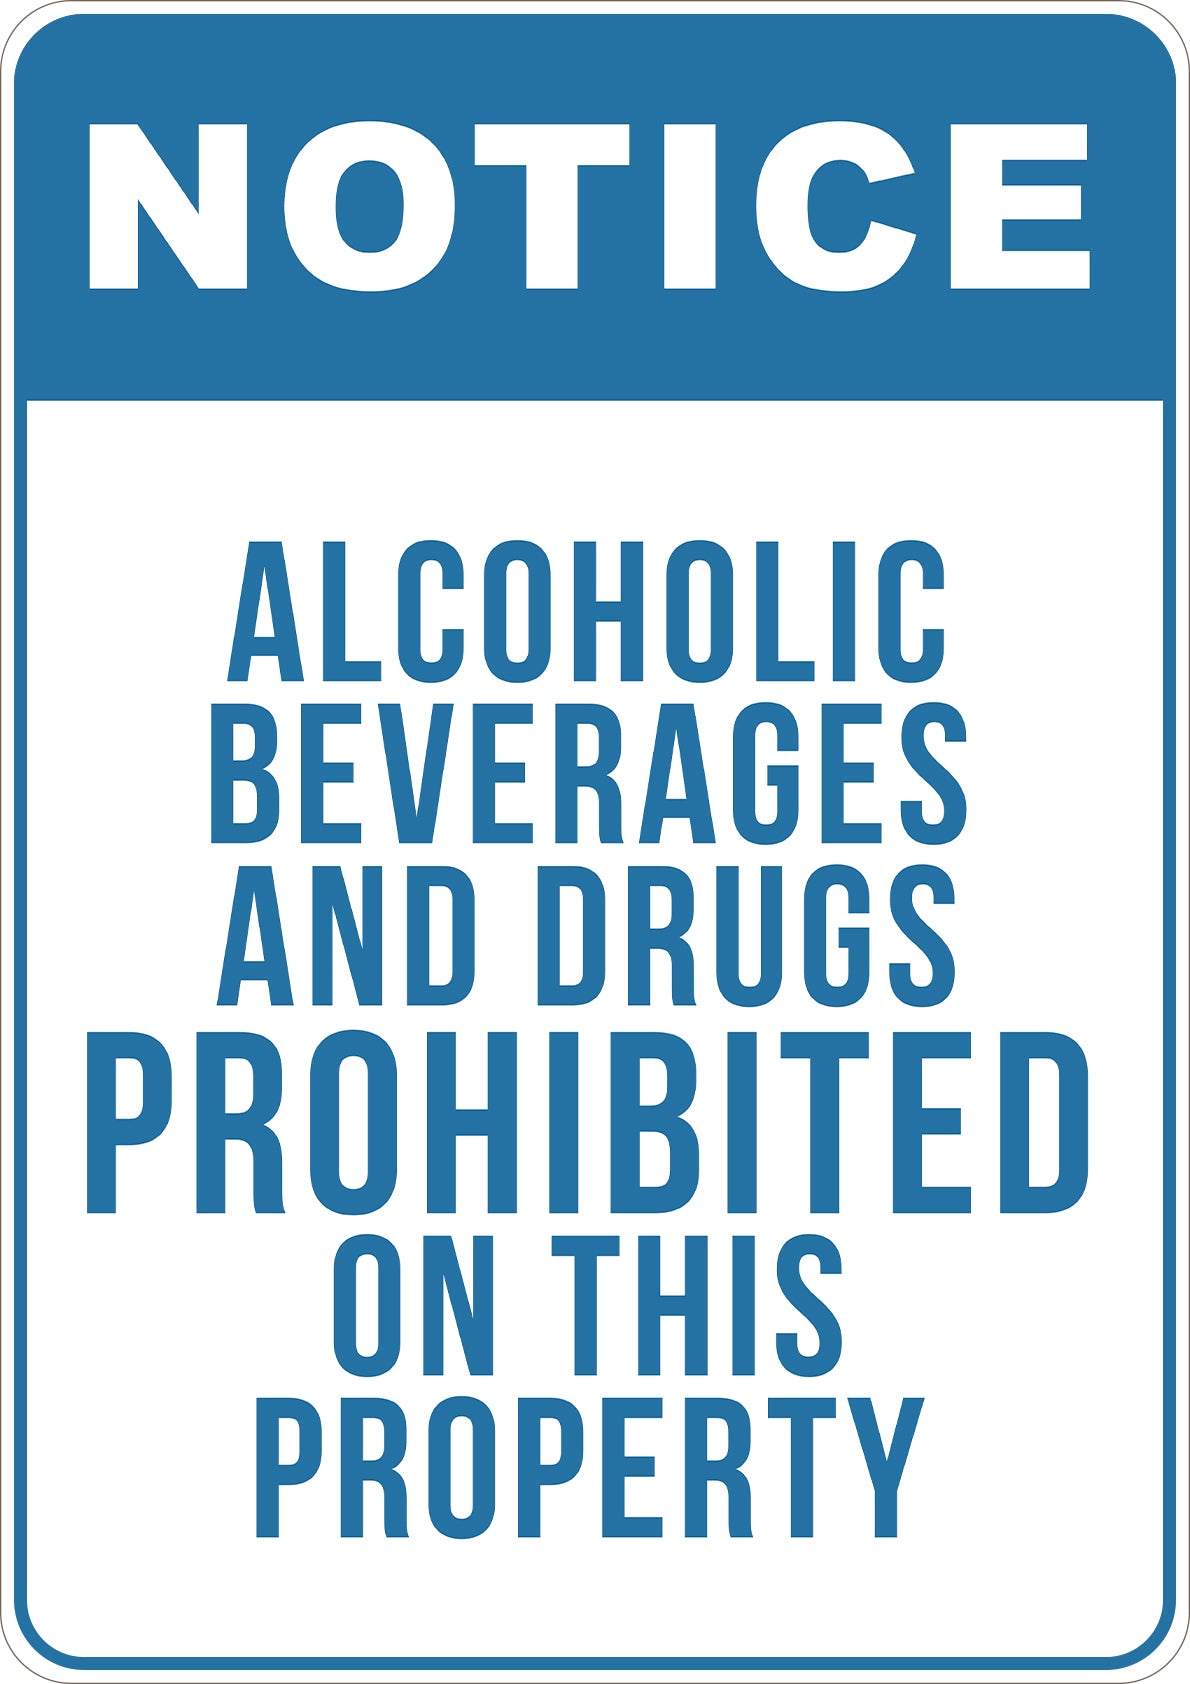 Alcoholic Beverages And Drugs Prohibited on This Property Printed Sign